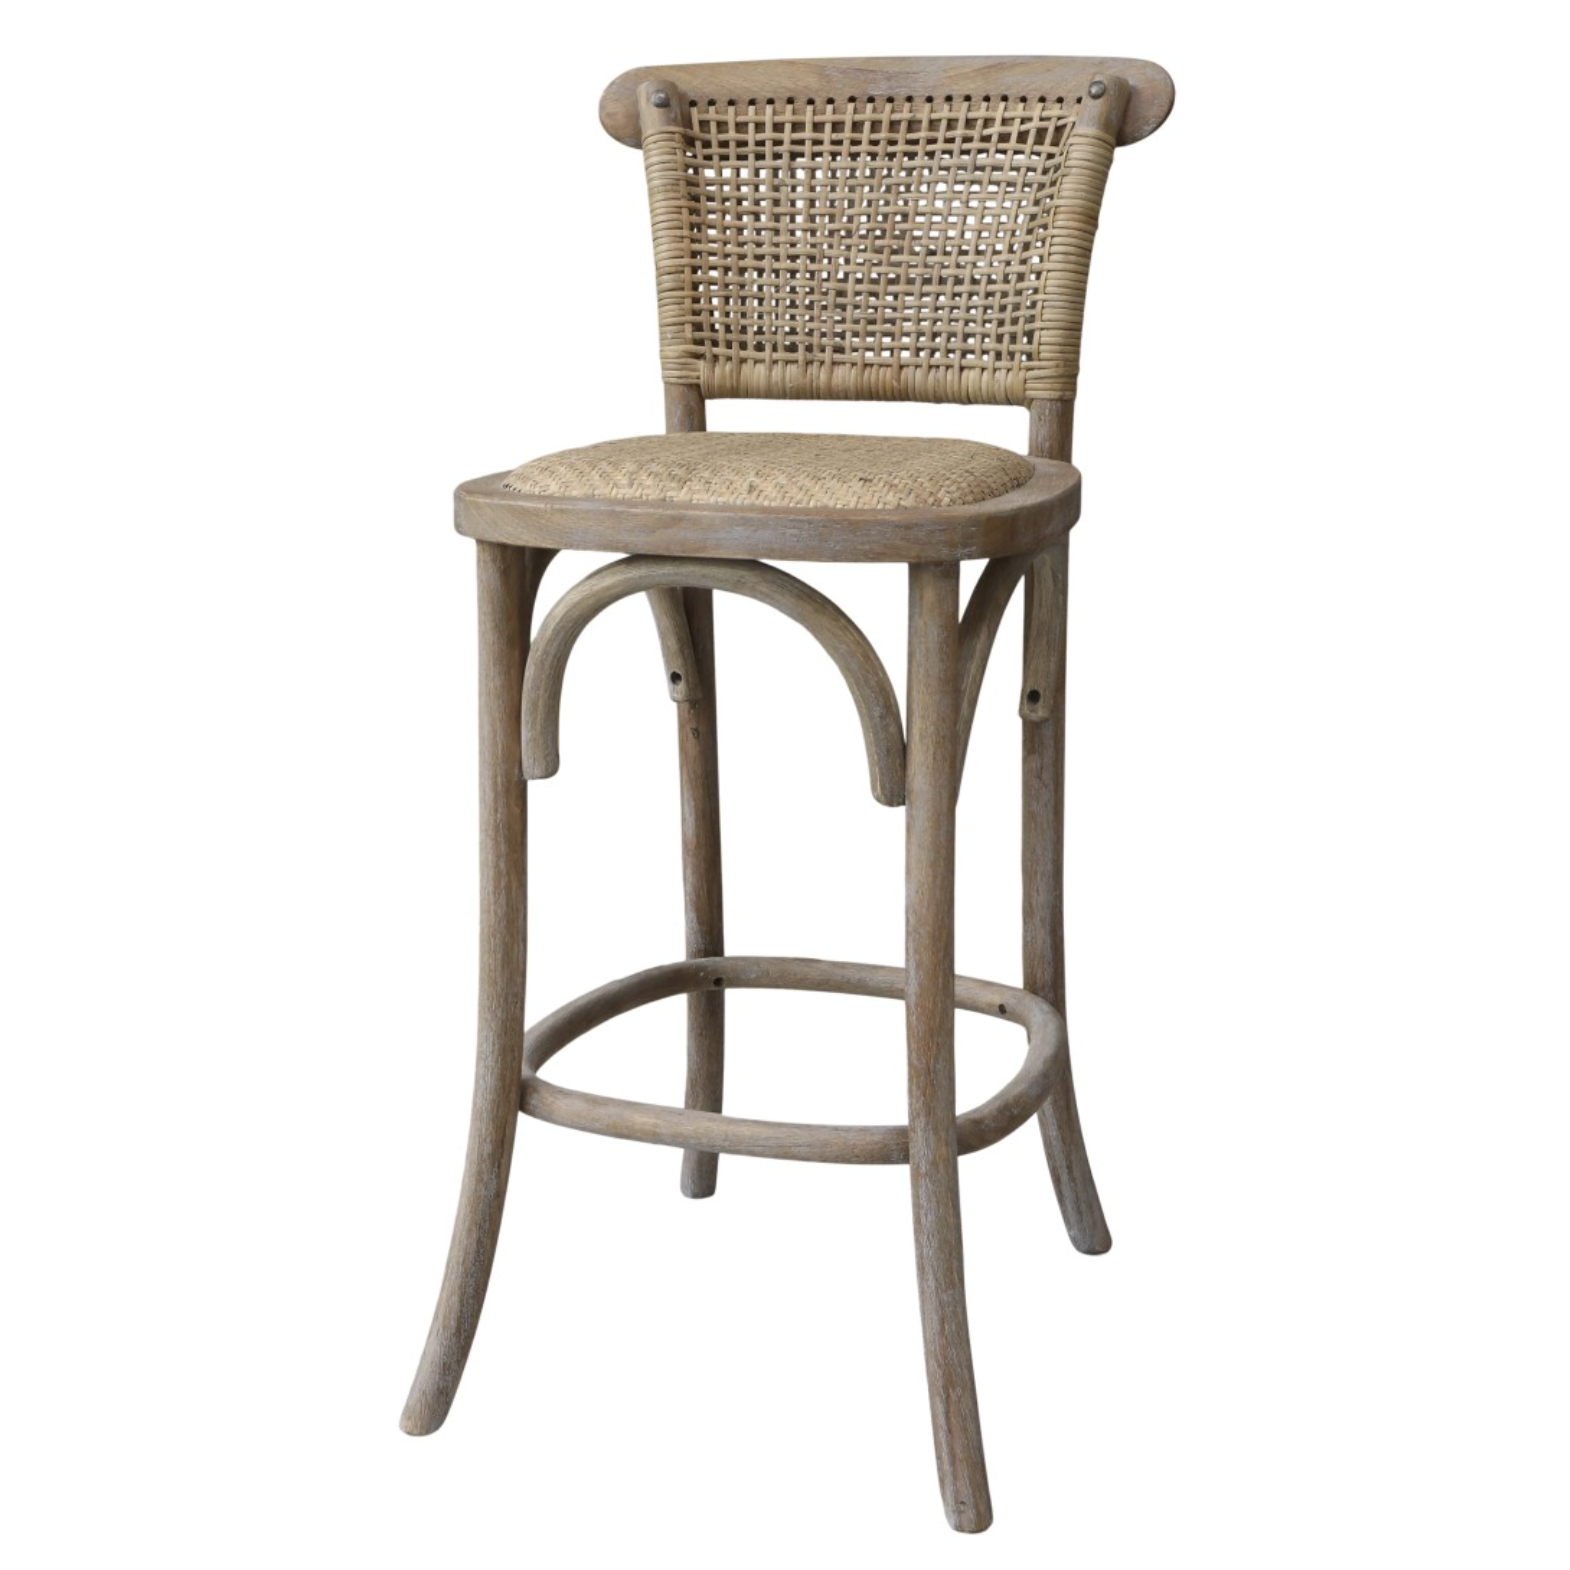 Wicker bar stool with cafe style. 